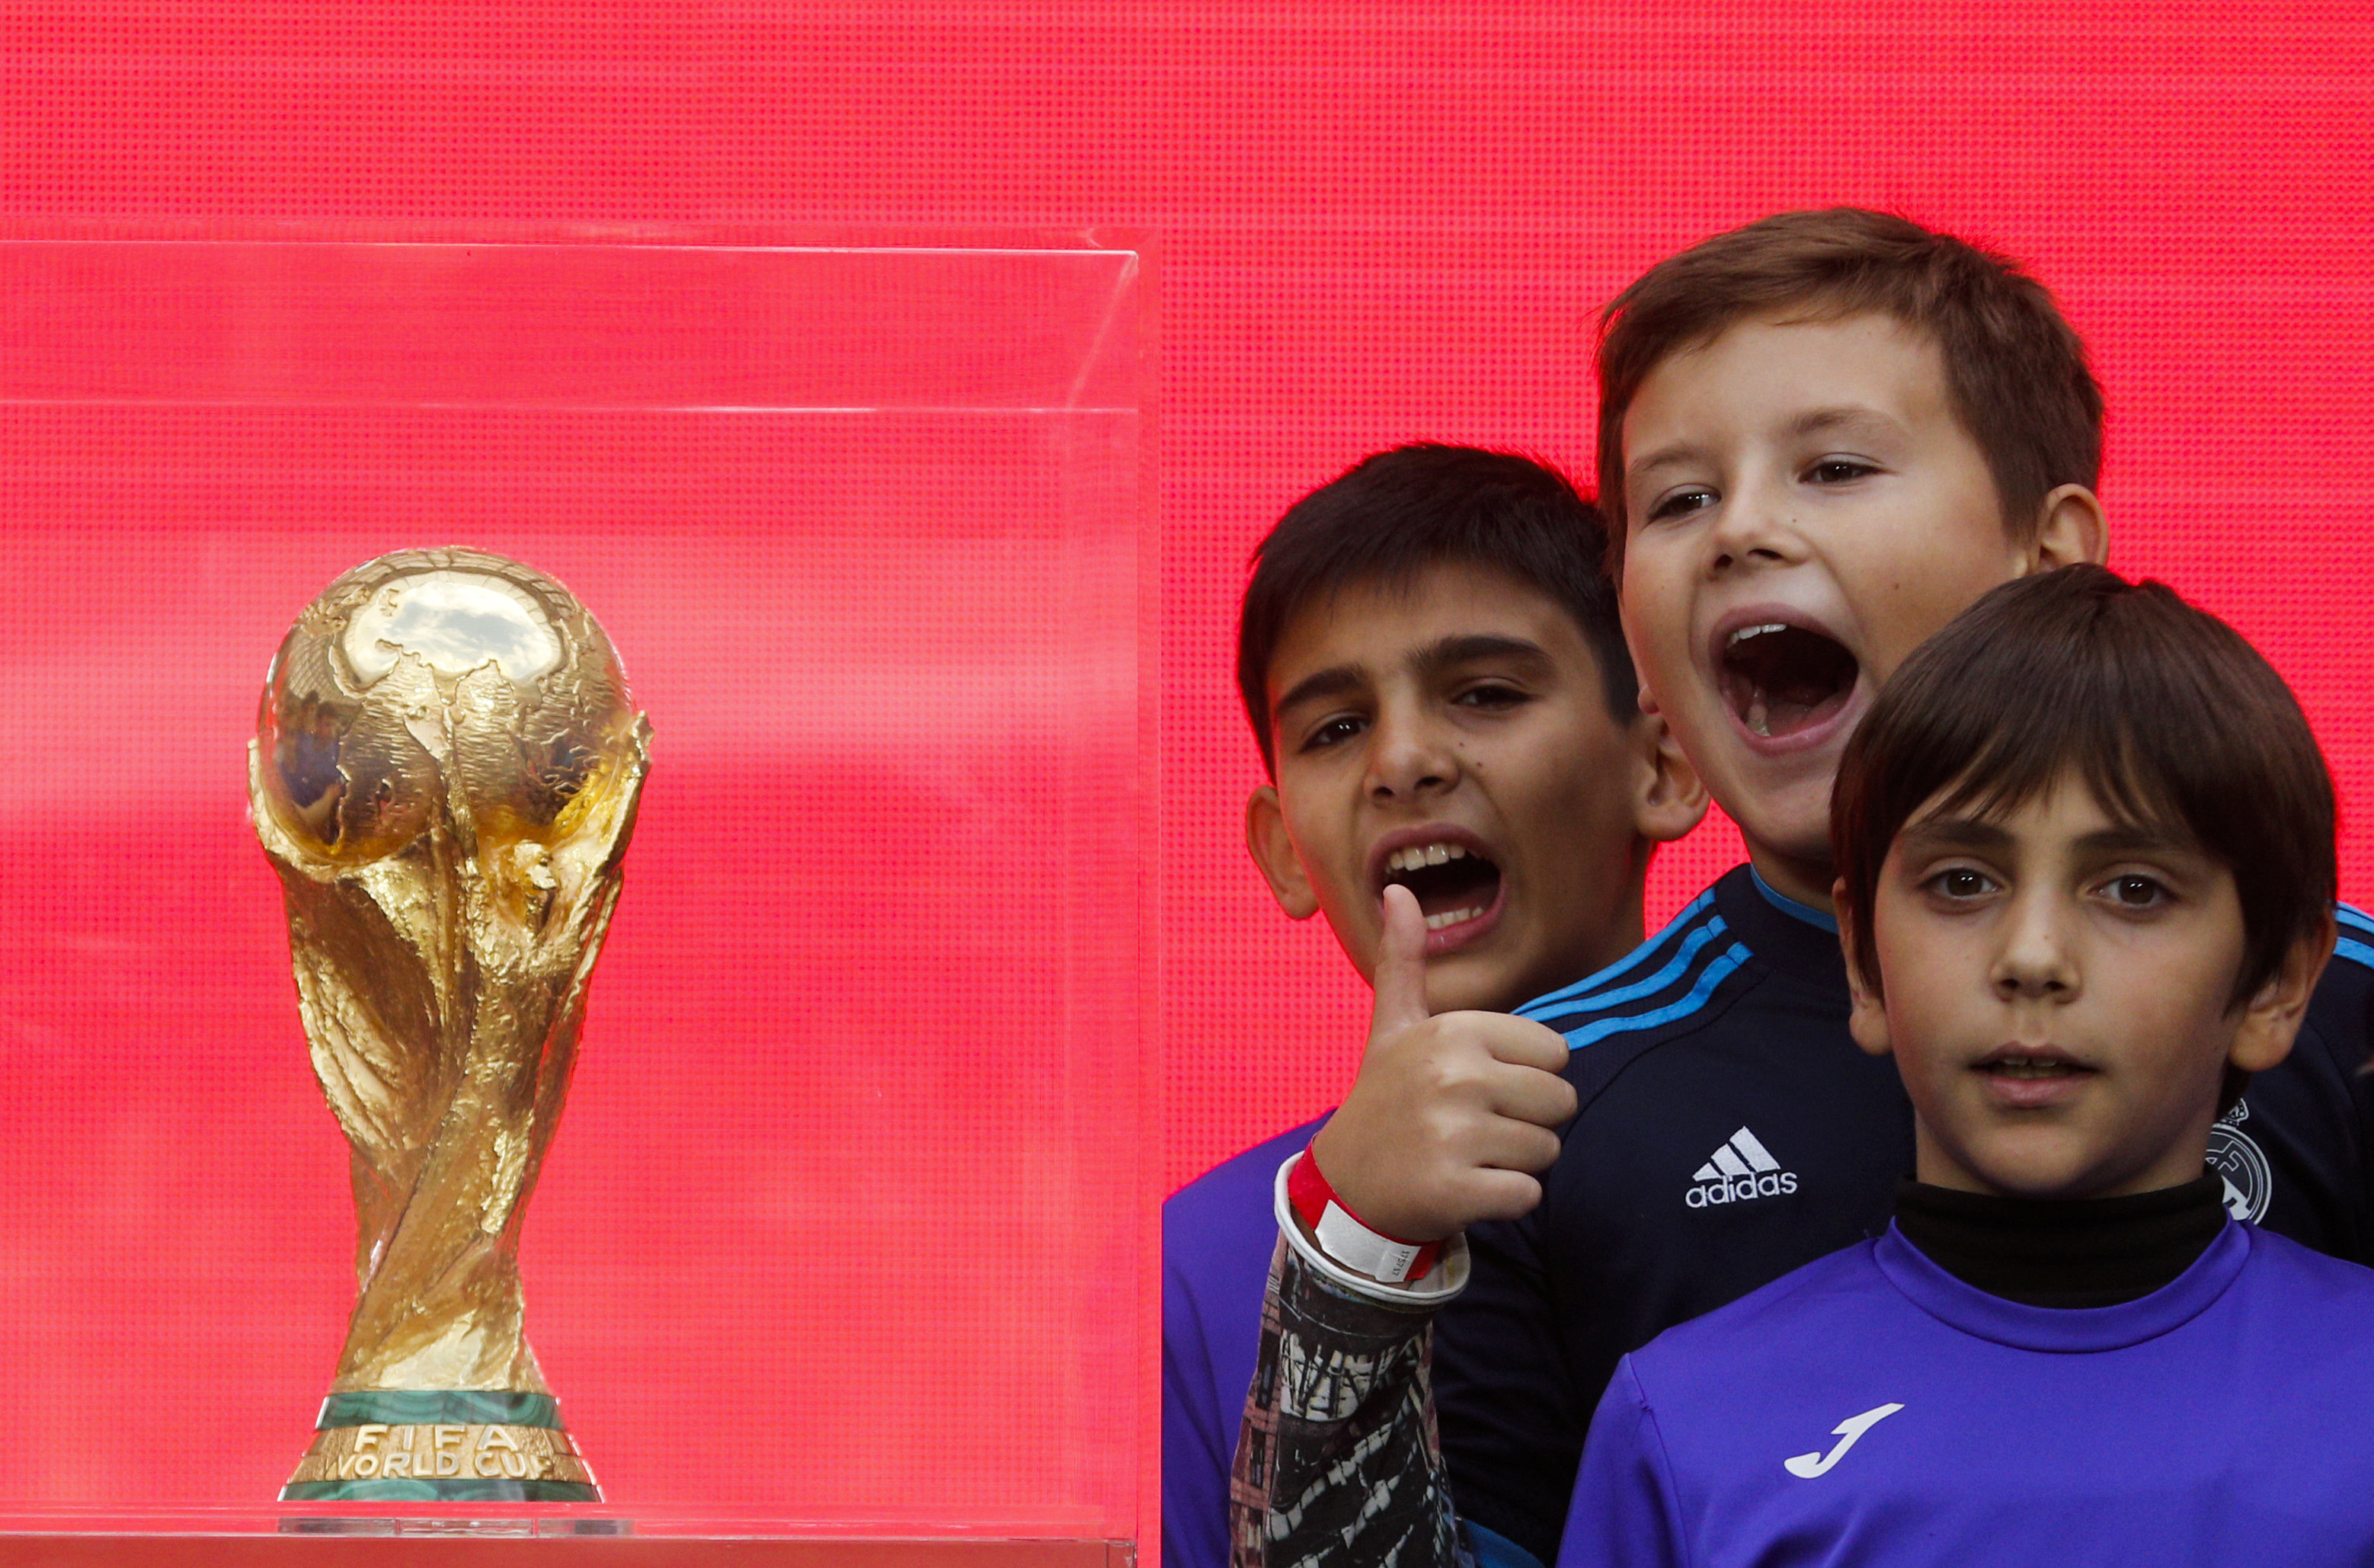 Children pose for a photo during the FIFA World Cup Trophy Tour kick-off ceremony at the Luzhniki Stadium which will host matches of the 2018 FIFA World Cup, in Moscow